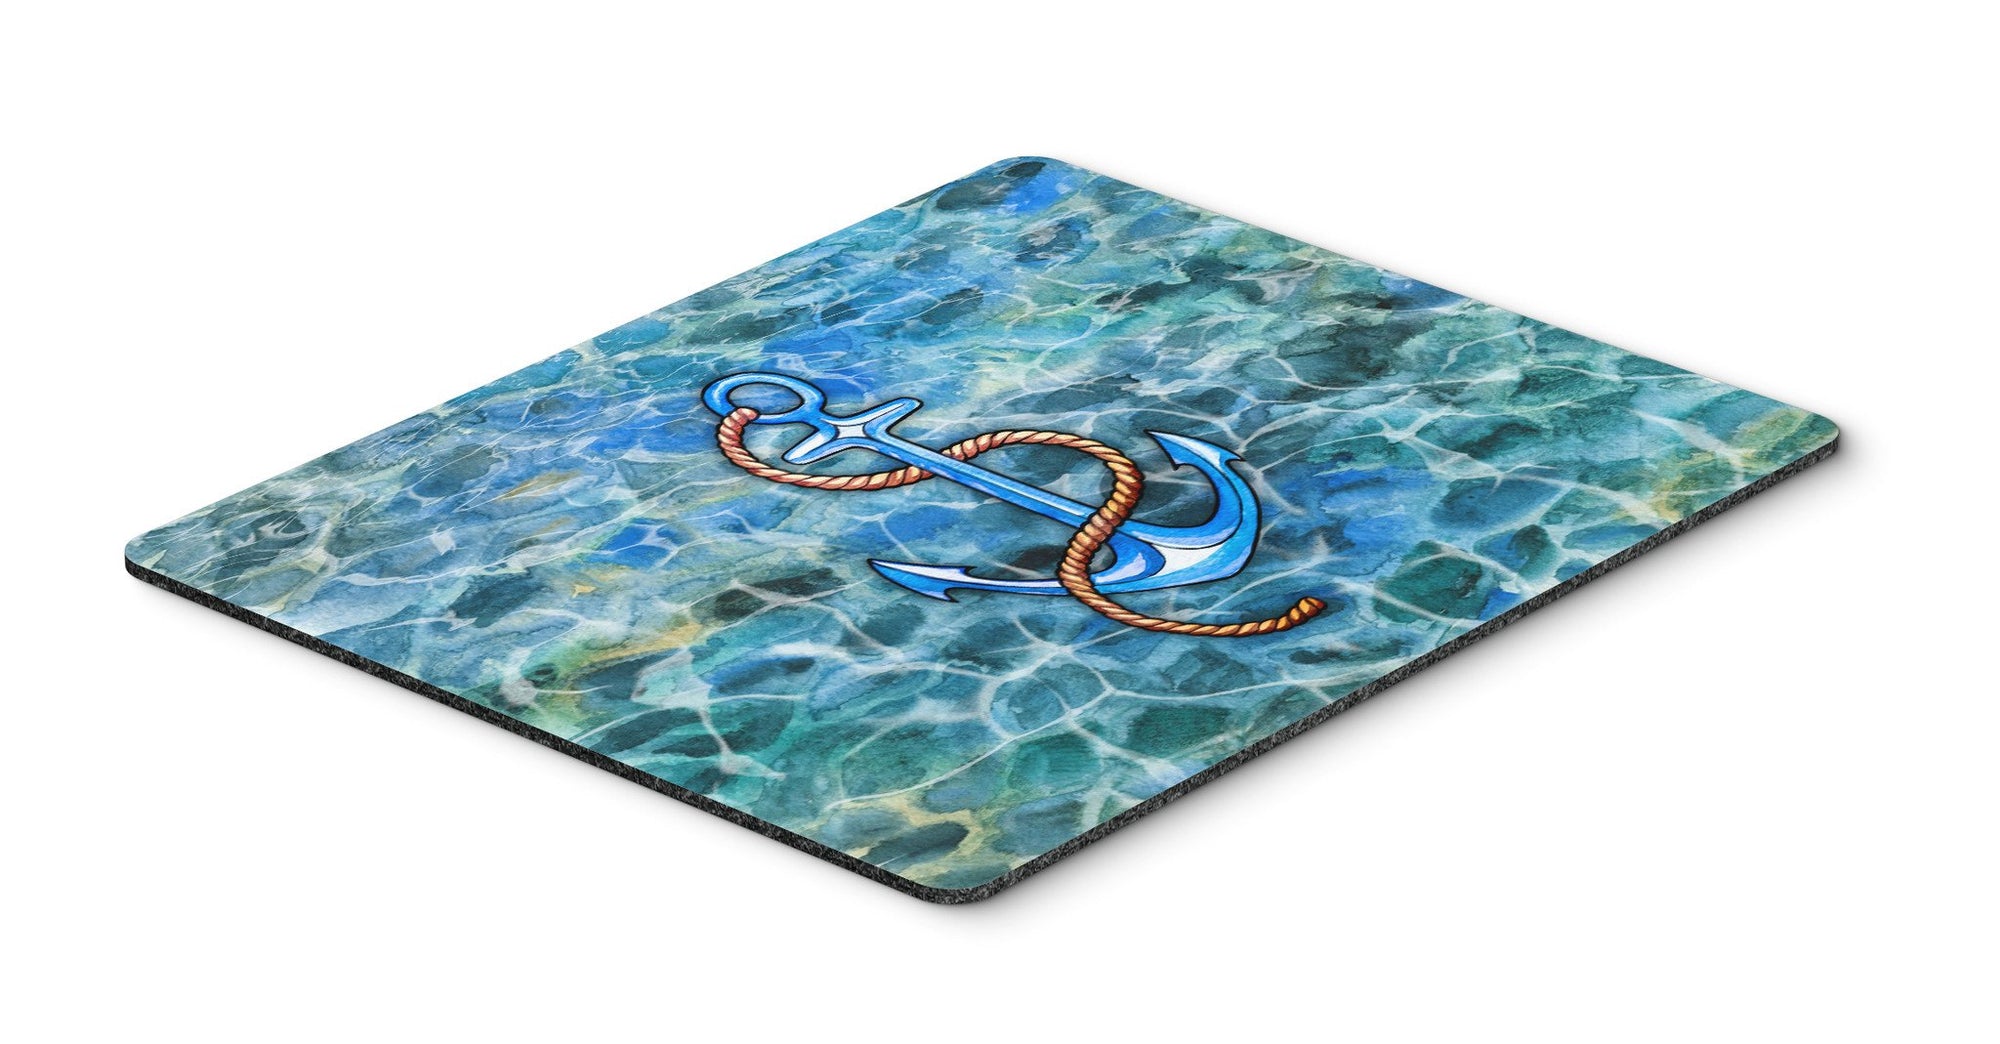 Anchor Mouse Pad, Hot Pad or Trivet BB5350MP by Caroline's Treasures